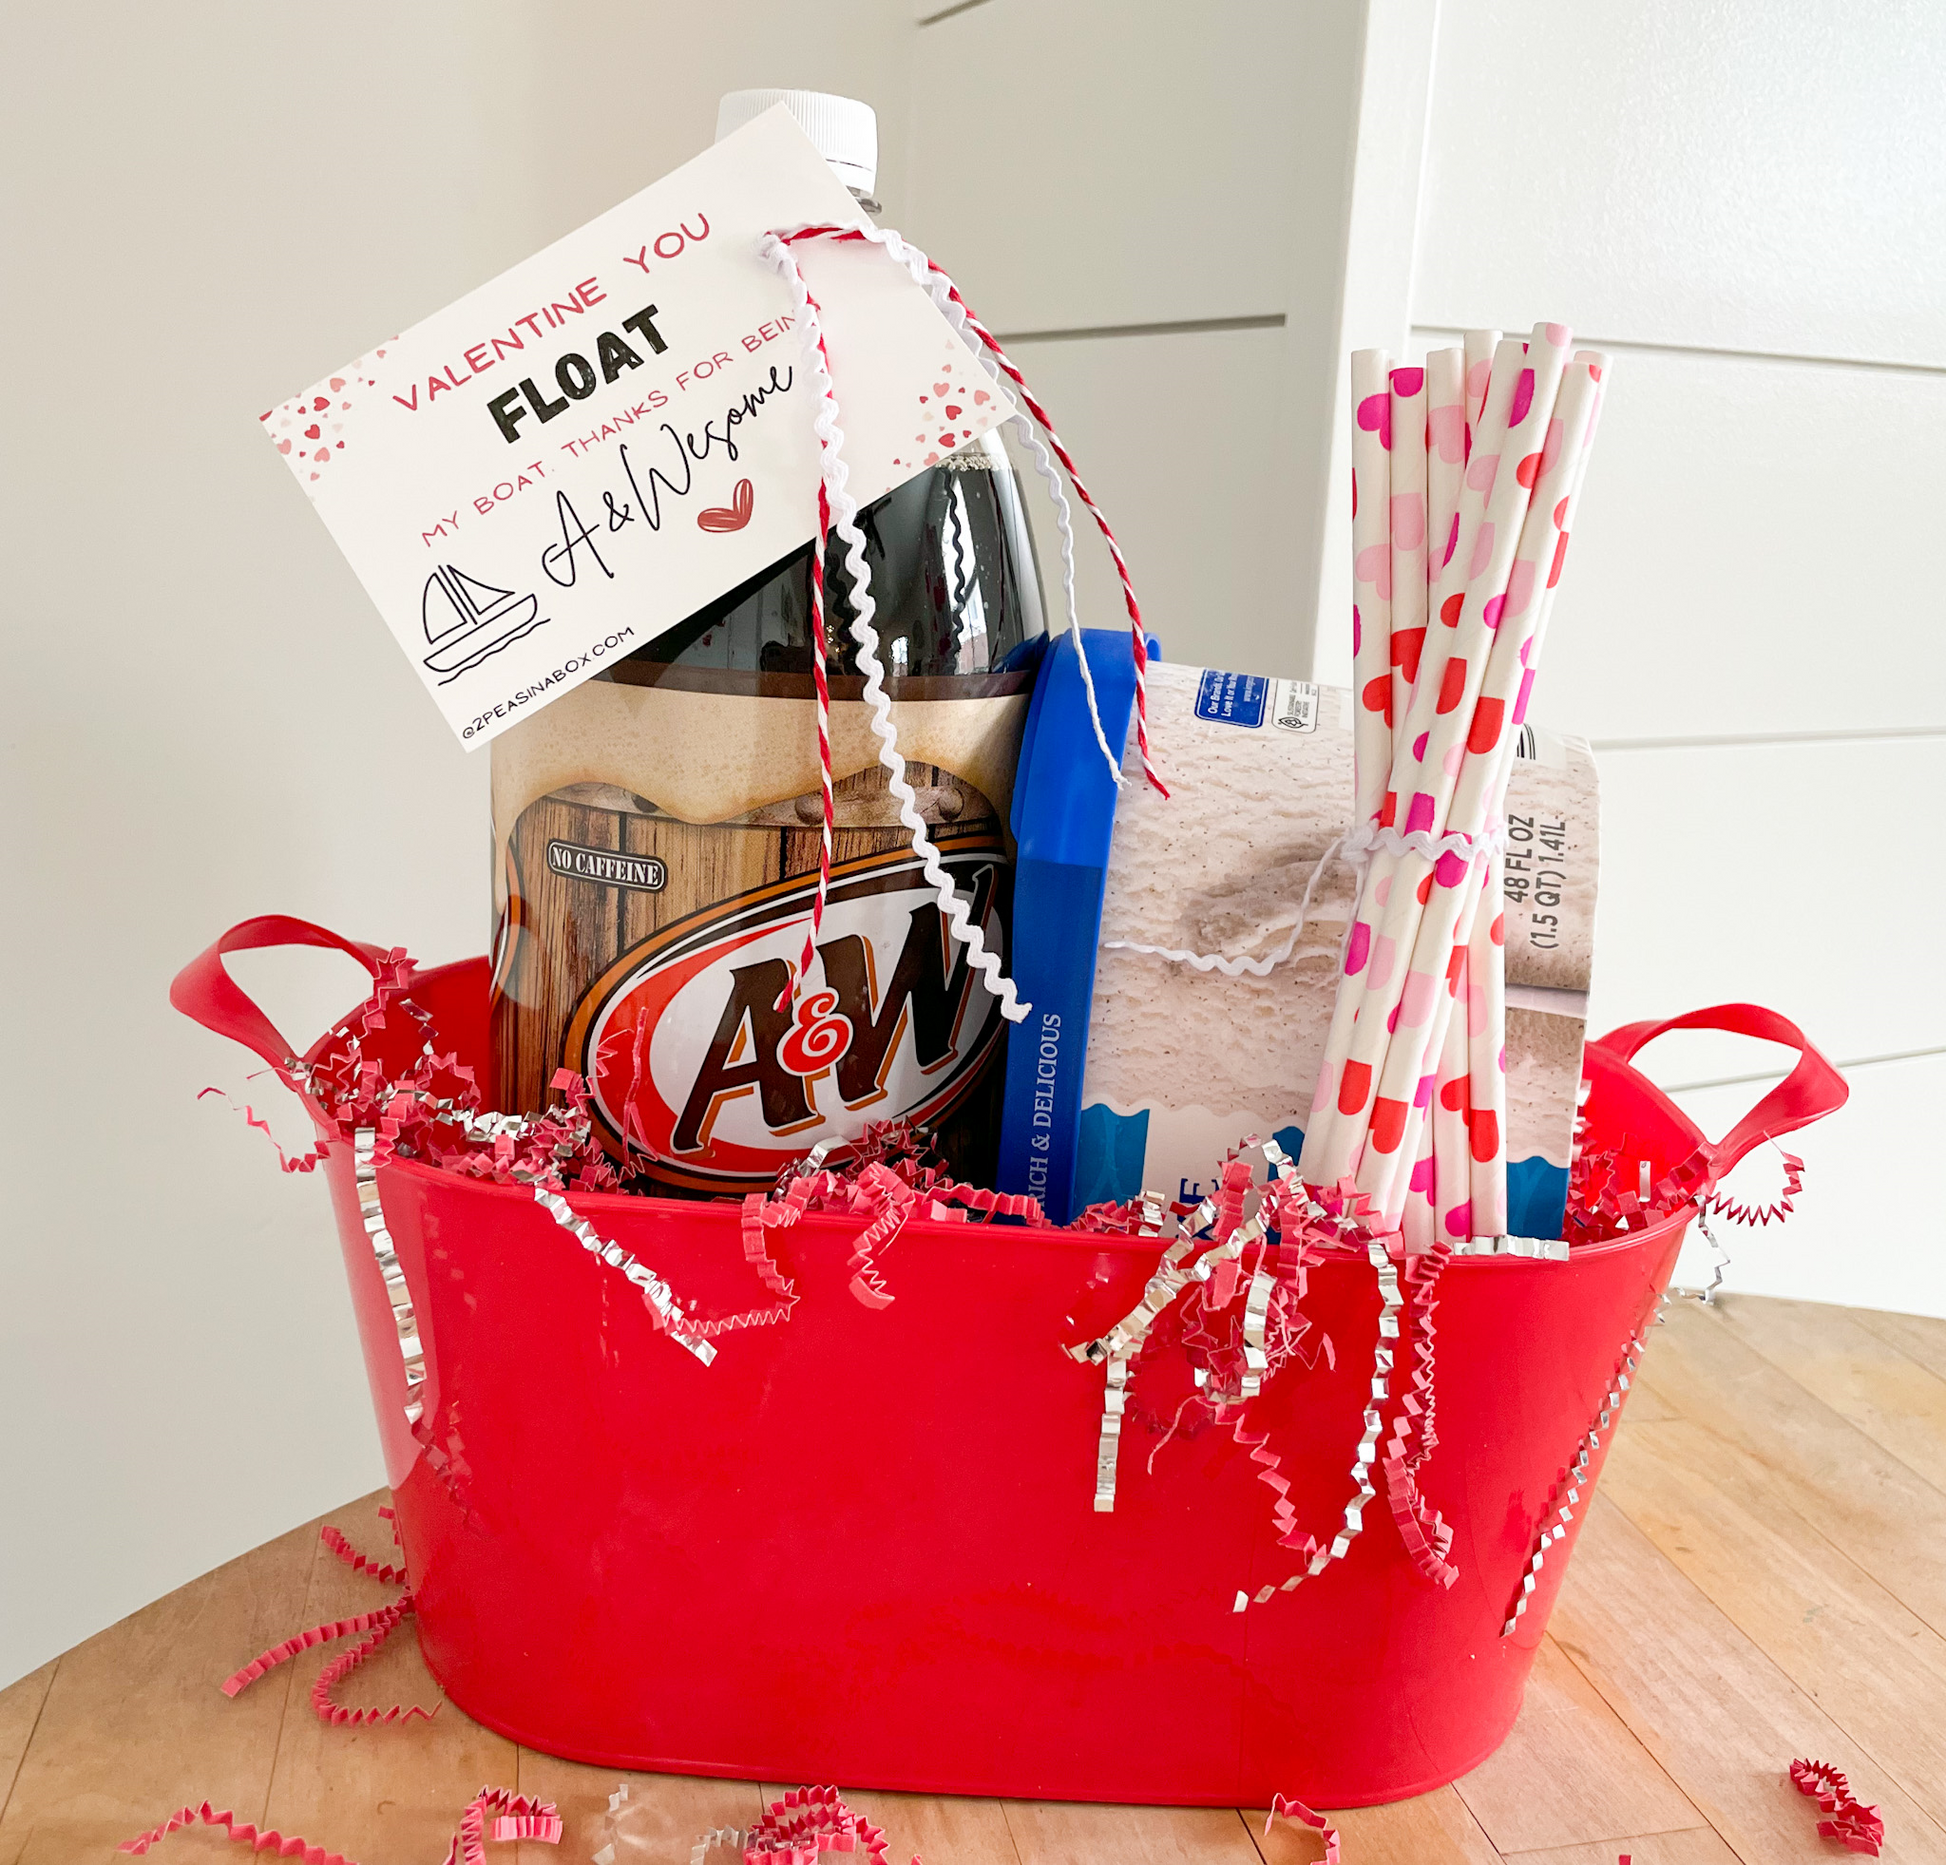 rootbeer printable tag attached to gift basket